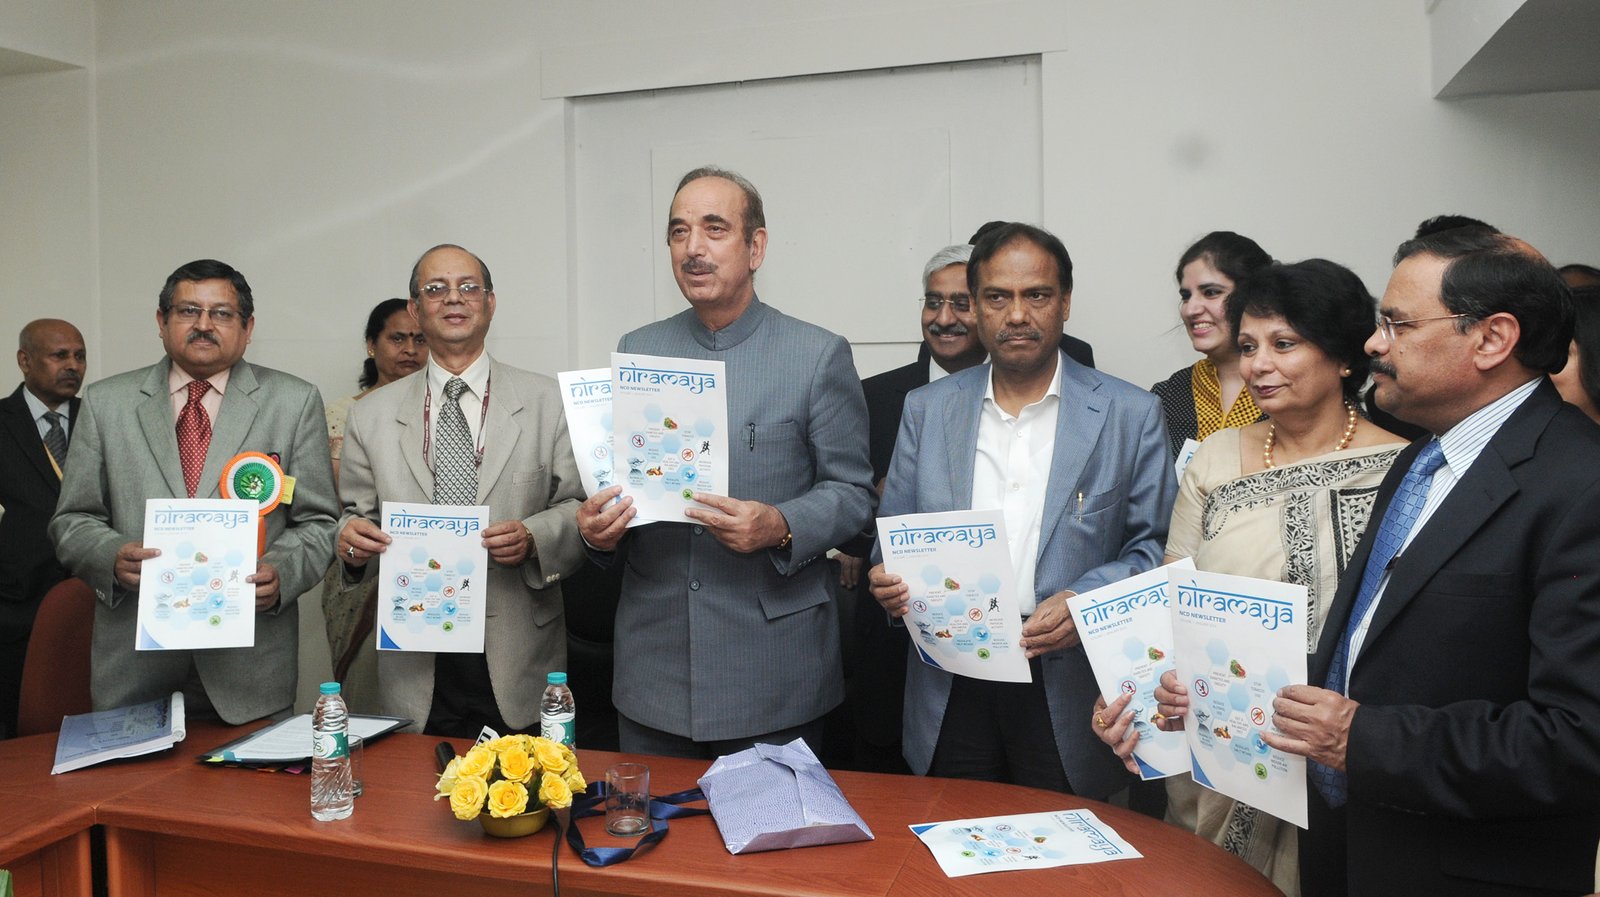 The Union Minister for Health and Family Welfare, Ghulam Nabi Azad releasing the NCD newsletter 'Niramaya', at the inauguration of the Department of Health Research Building, in New Delhi on February 27, 2014. The DG, ICMR and Secretary, Department of